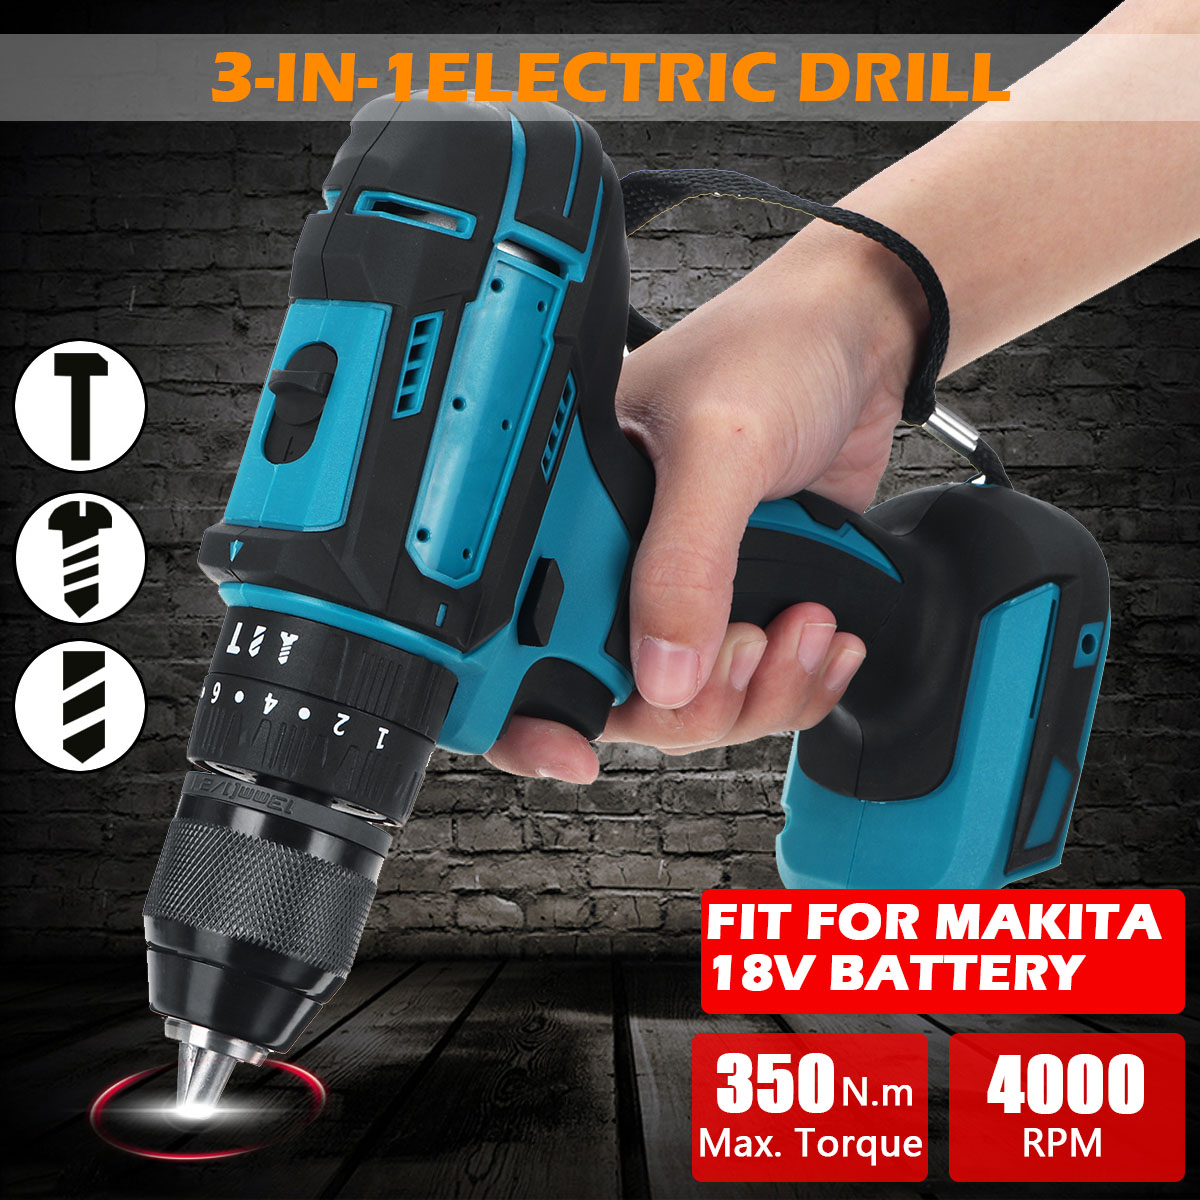 Drillpro-10mm-Chuck-Impact-Drill-350Nm-Cordless-Electric-Drill-For-Makita18V-Battery-4000RPM-LED-Lig-1642853-3